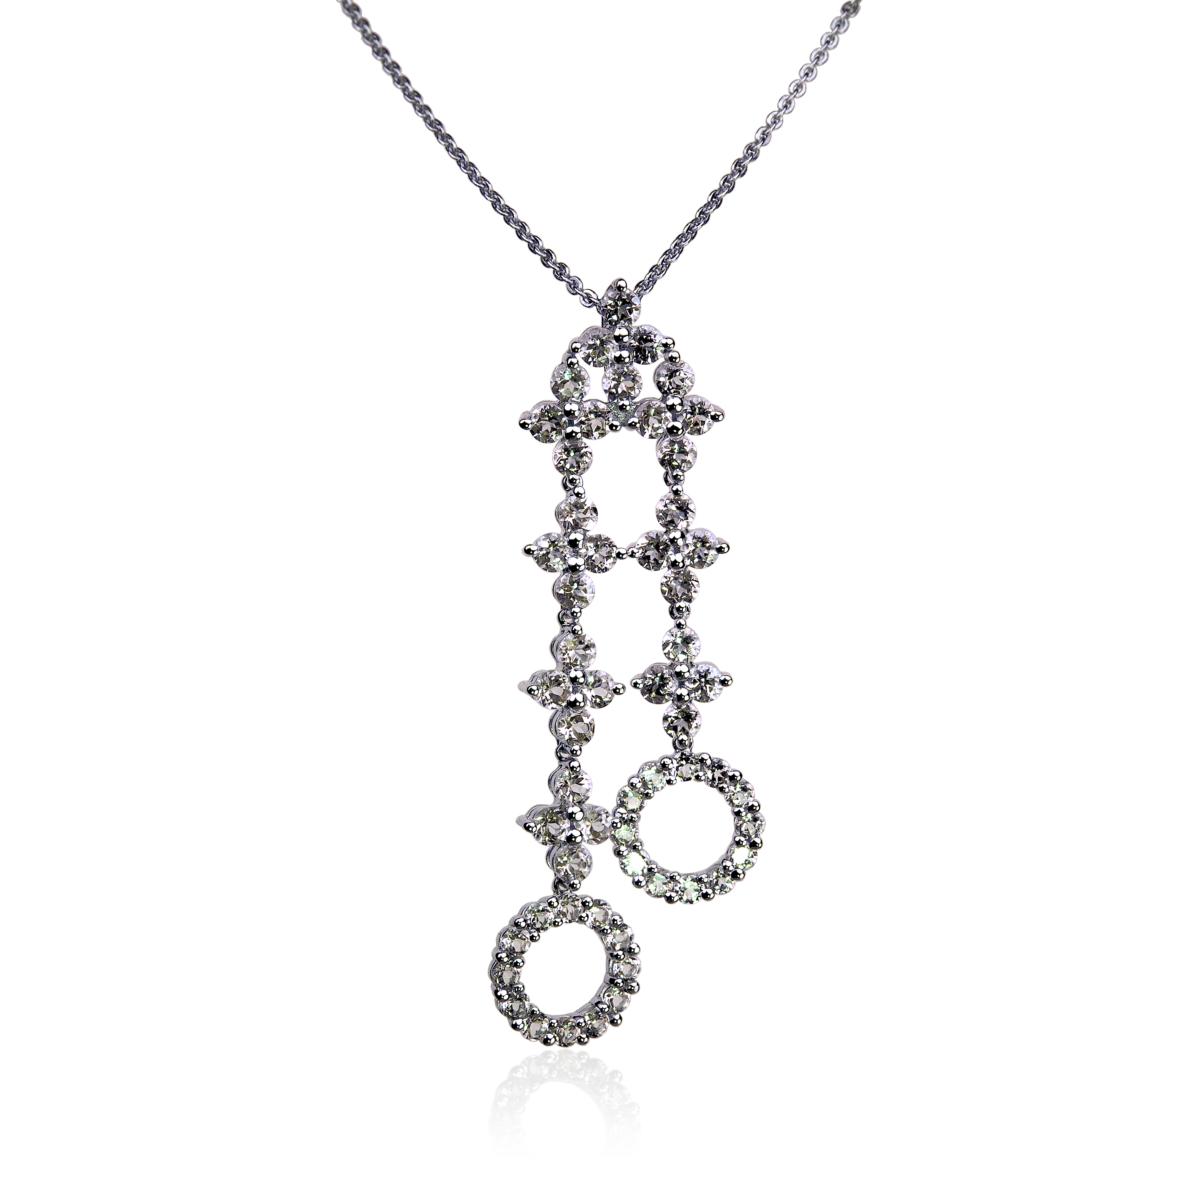 Astral Necklace